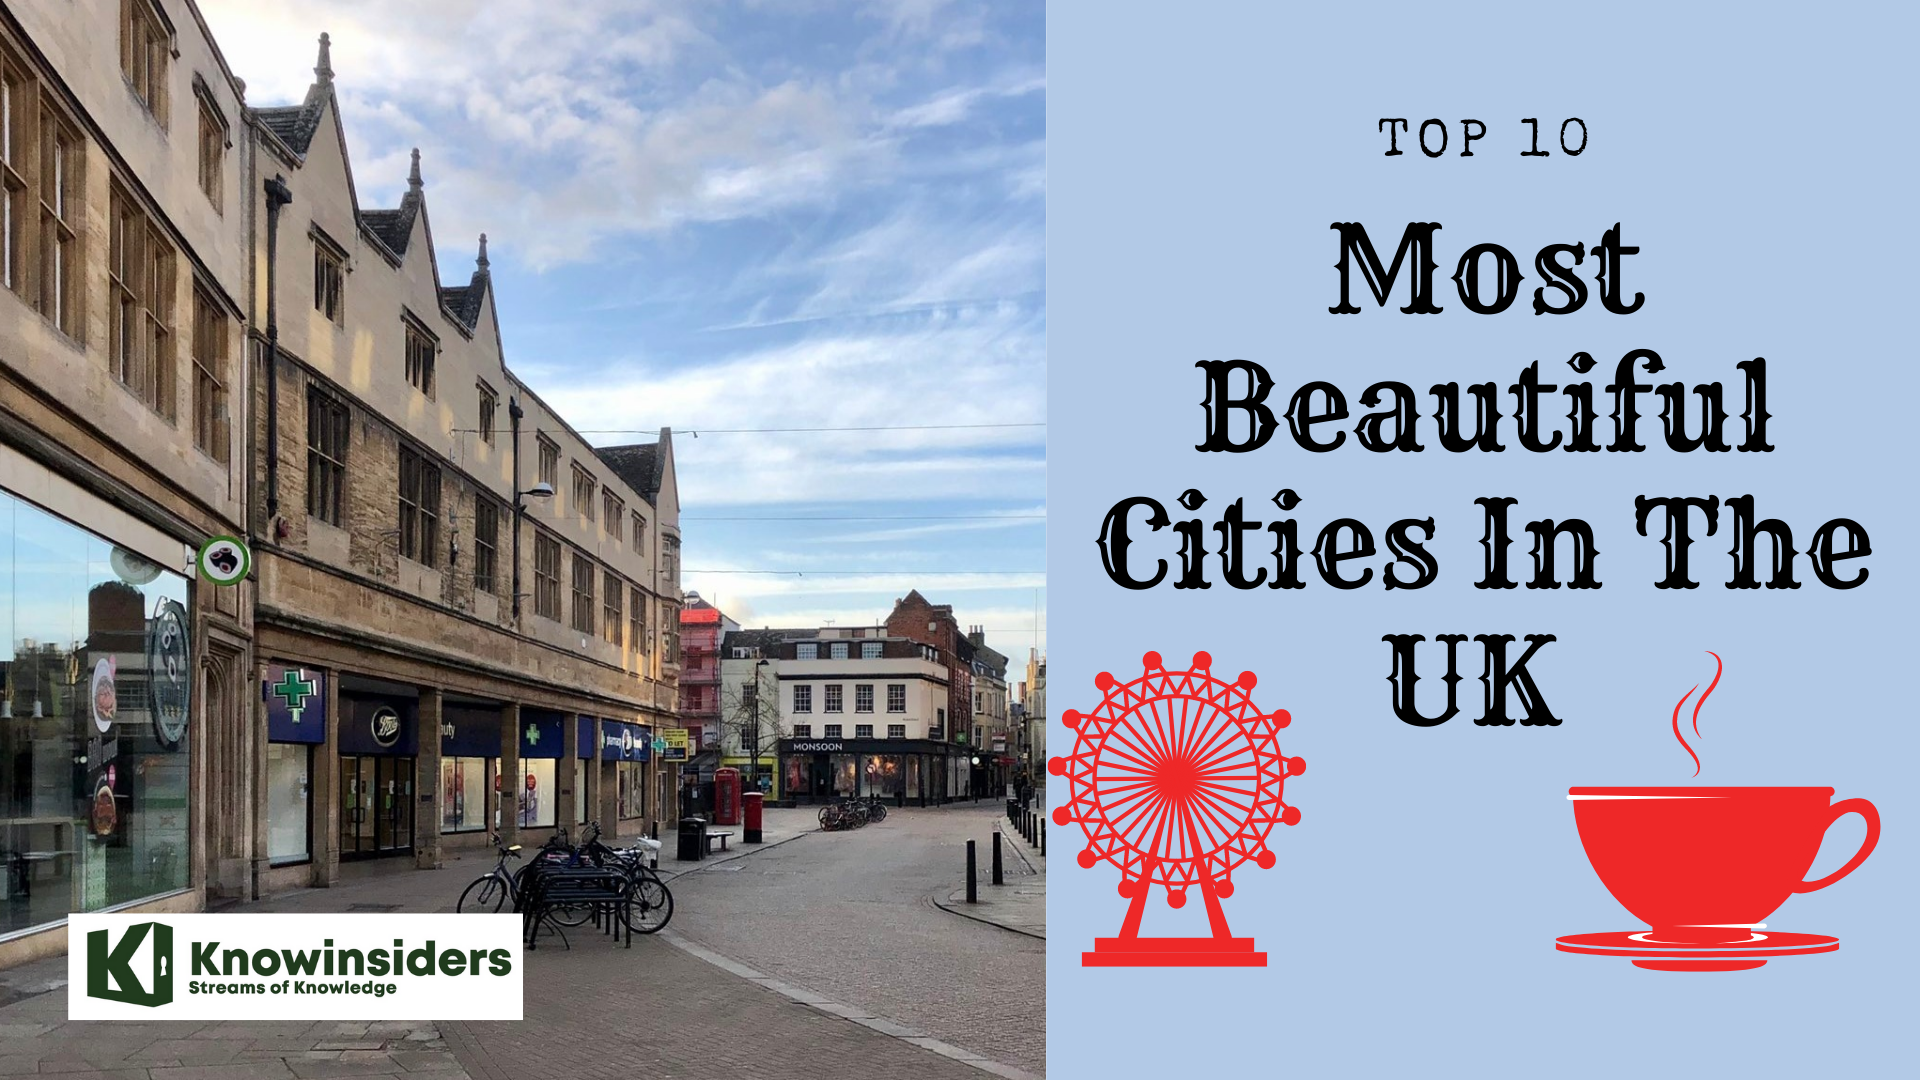 Top 10 Most Beautiful Cities in the UK